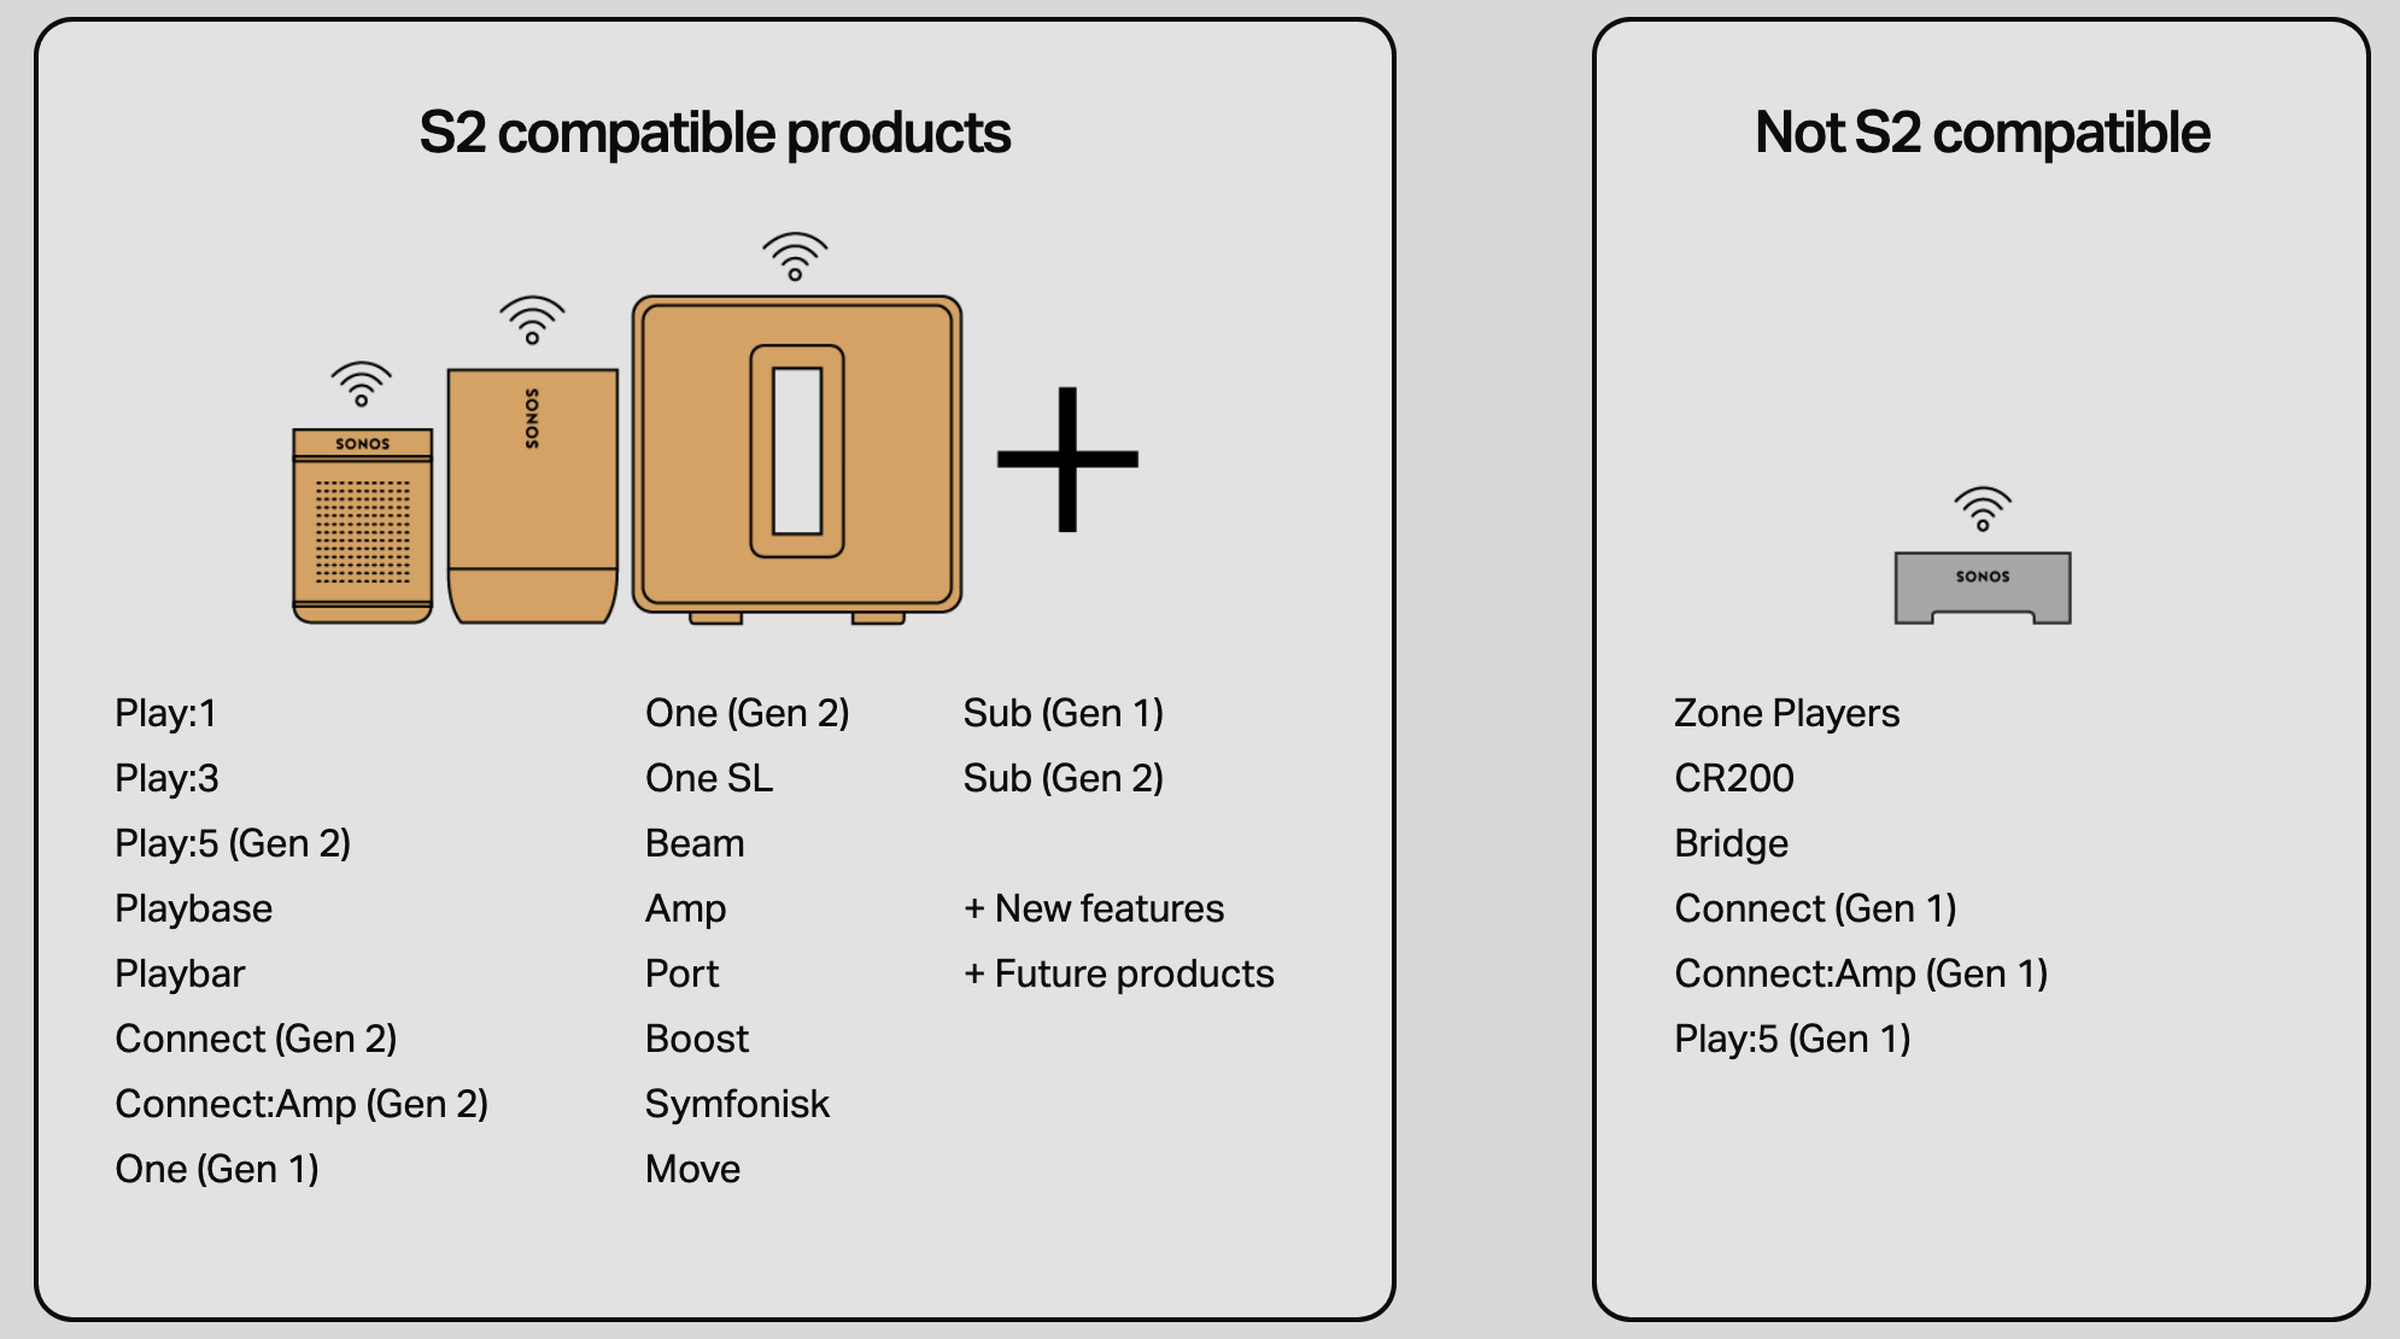 An infographic produced by Sonos shows which products are compatible with each platform.